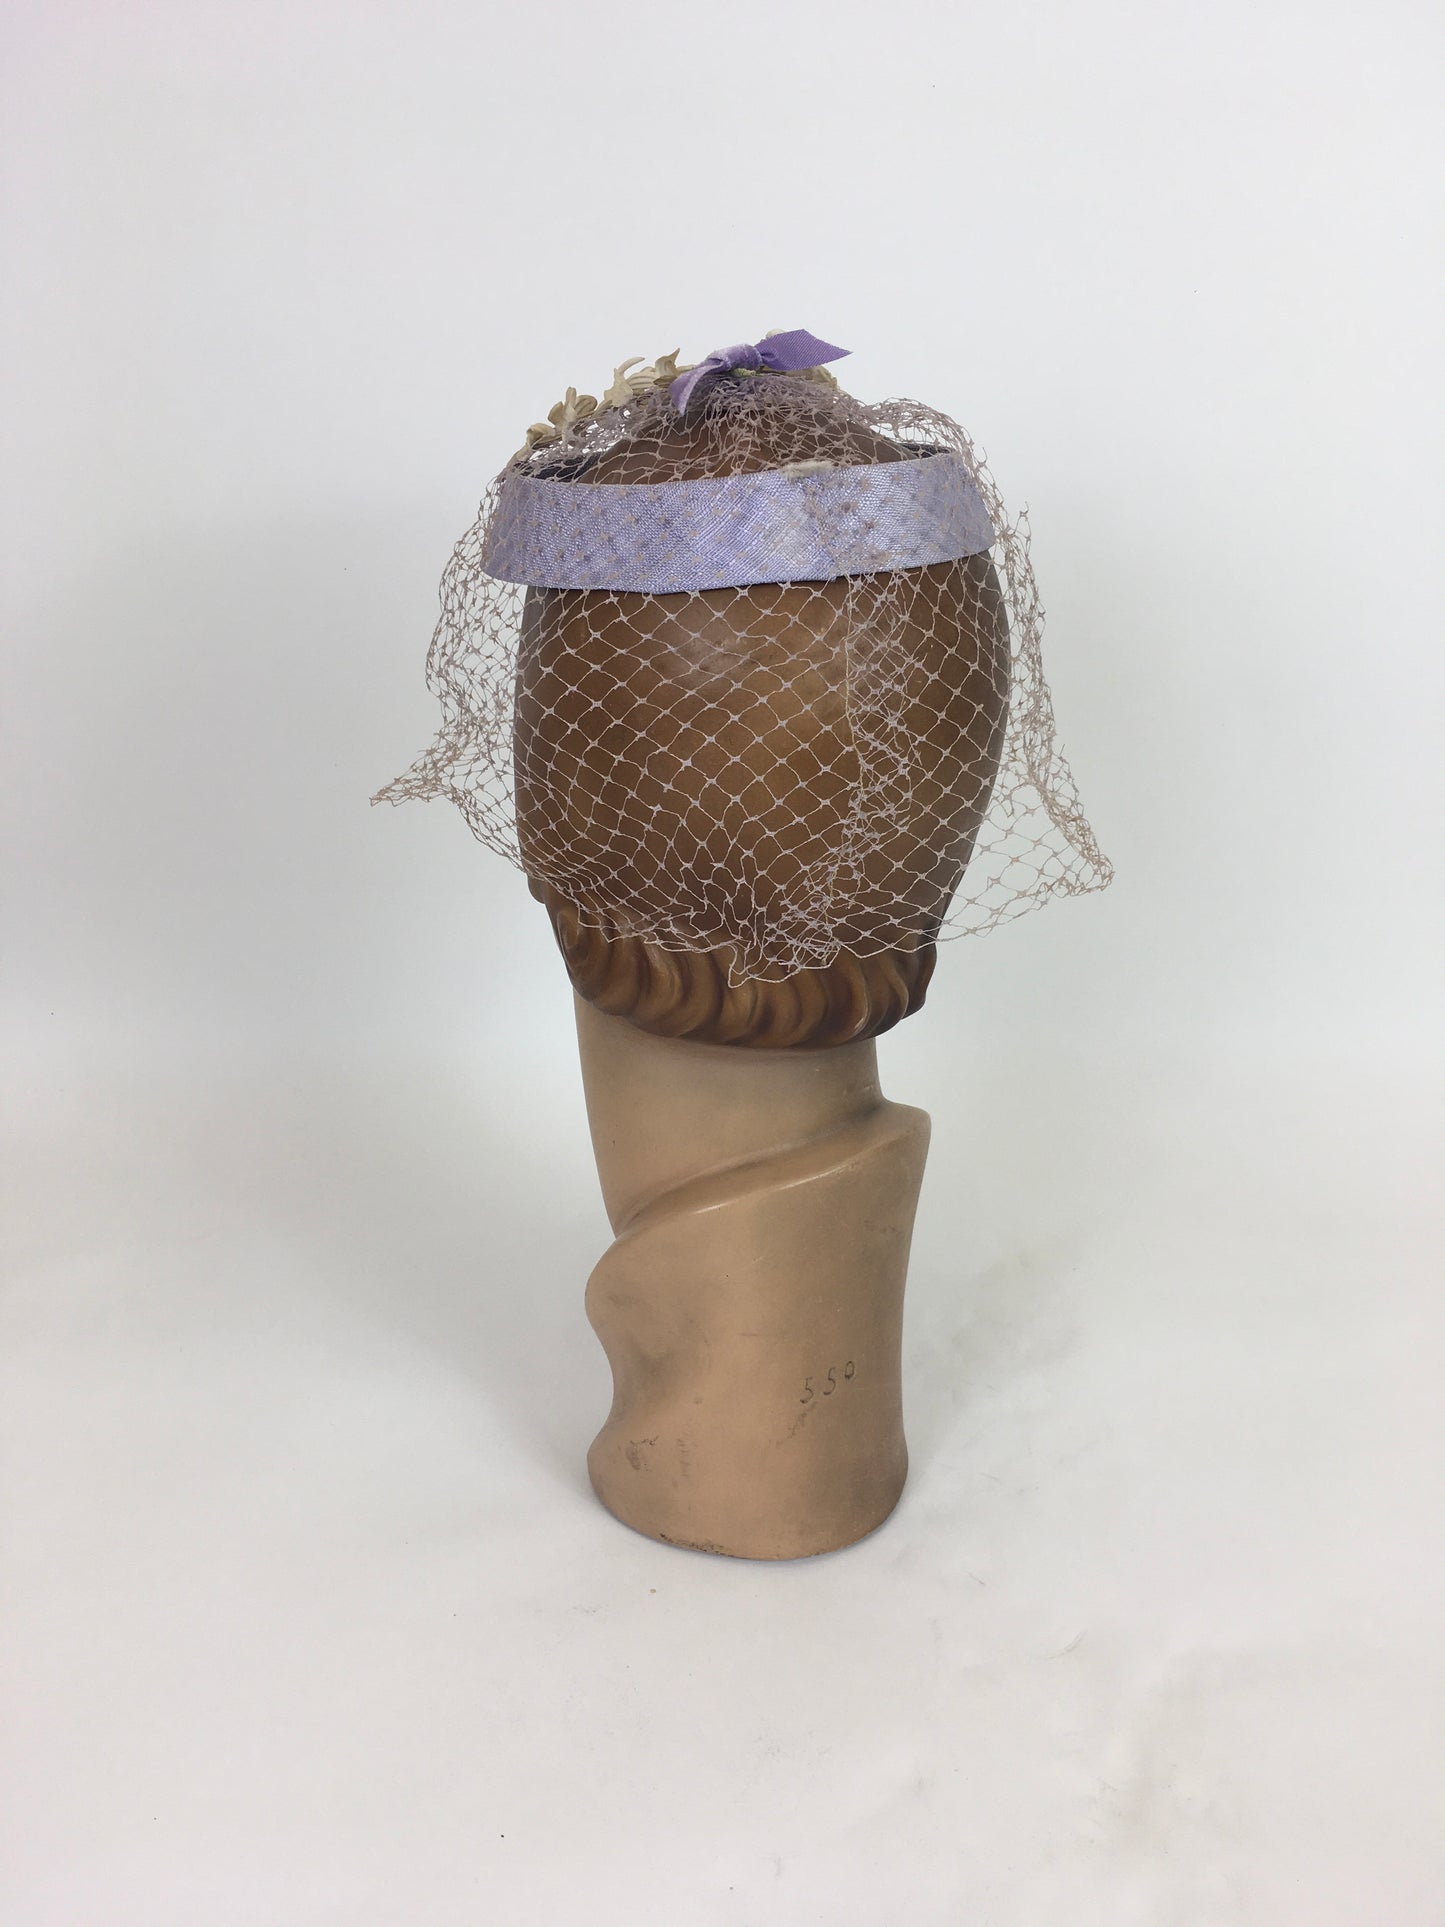 Original 1950’s Soft Lilac Headpiece - With Delicate Ivory Floral Millinery and Powdered Veiling